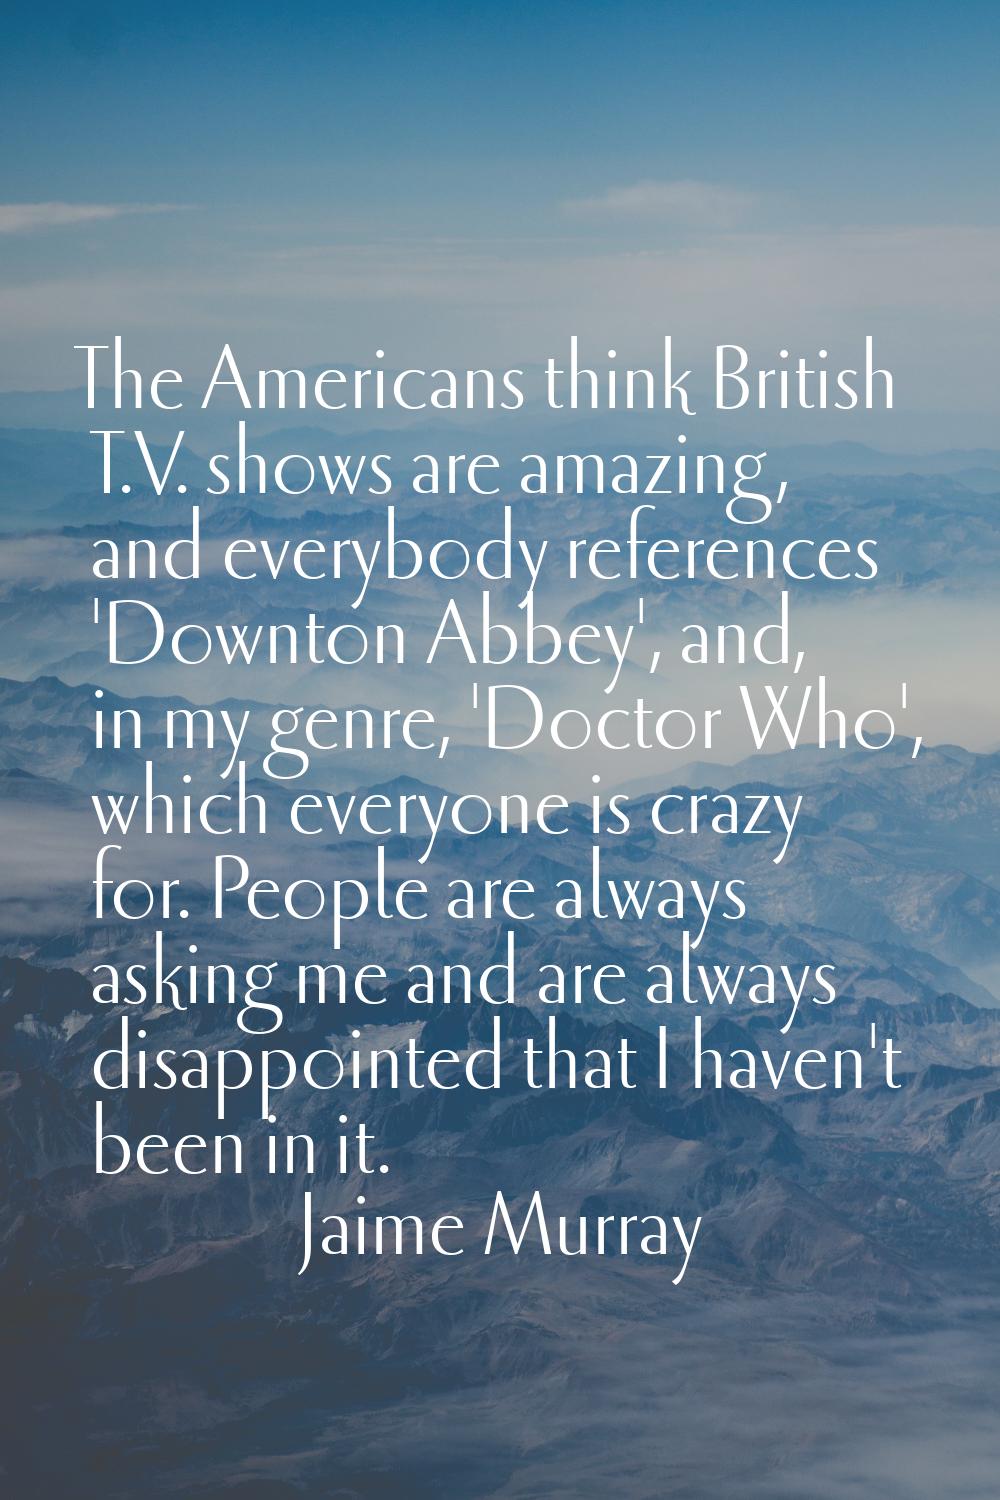 The Americans think British T.V. shows are amazing, and everybody references 'Downton Abbey', and, 